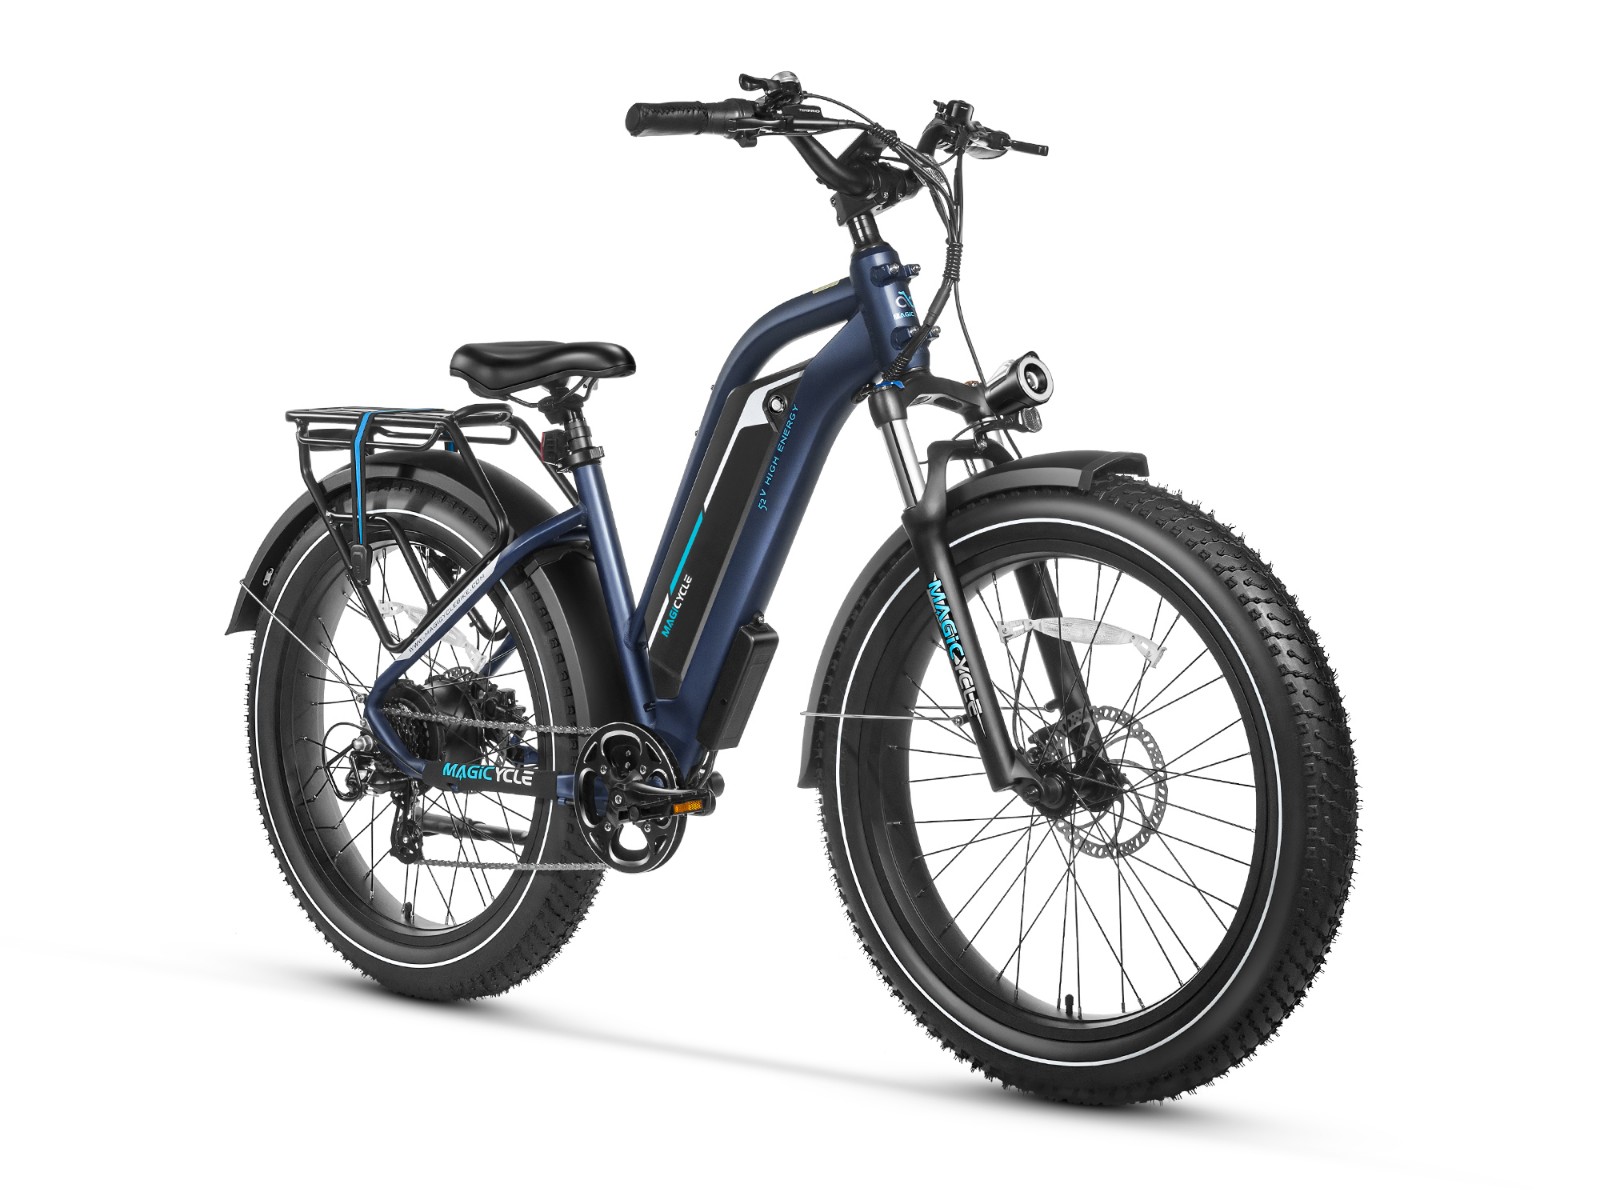 Combo Sale - Magicycle Cruiser Pro Step-thru 20Ah Ebike with Second 52V 15Ah Battery - Canada Only